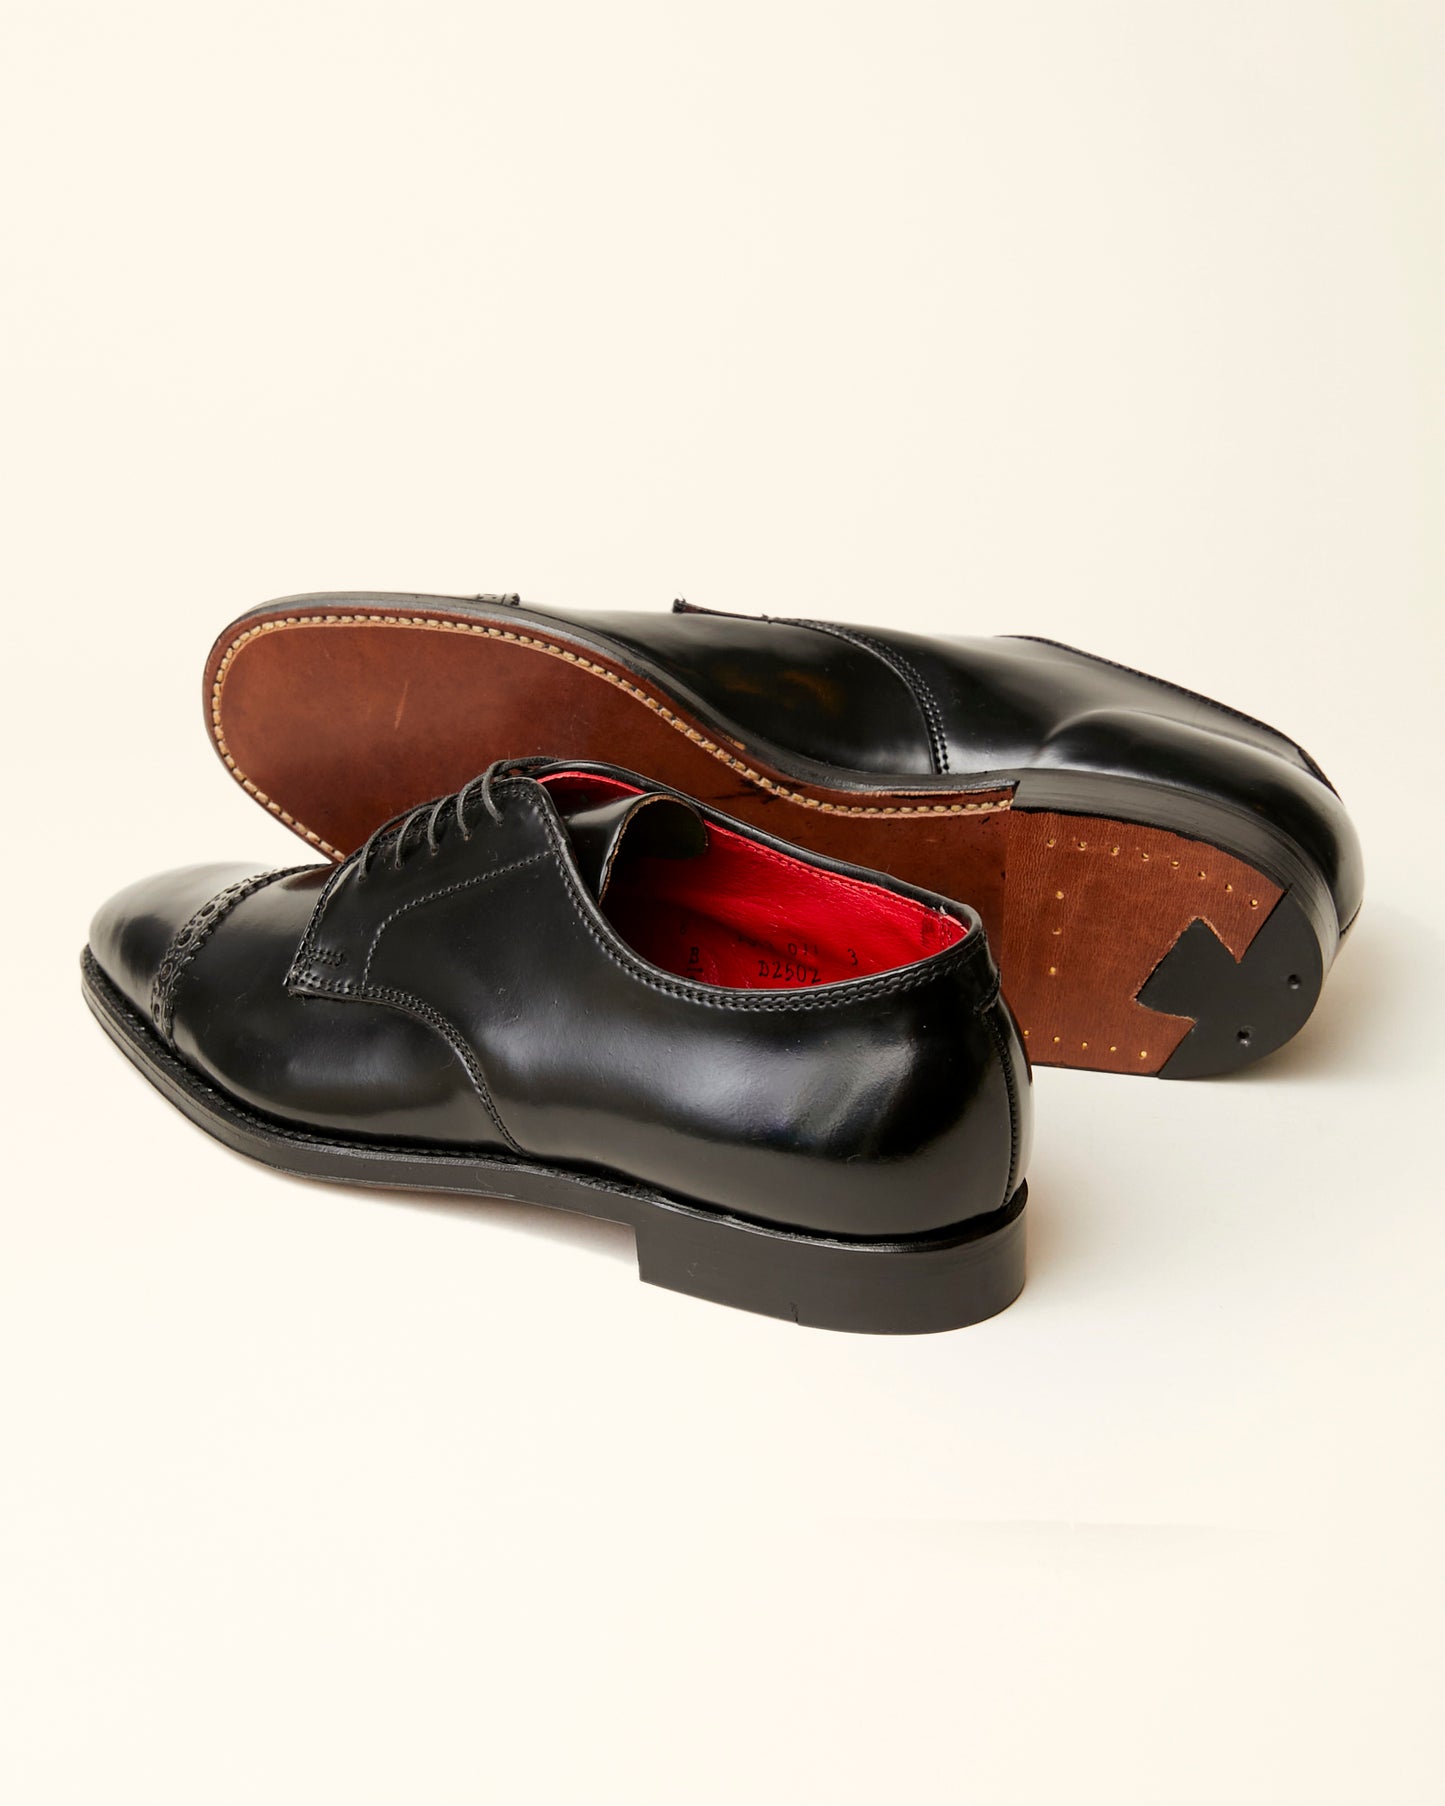 "Executive" Unlined Perforated Tip Blucher in Black Shell Cordovan, Plaza Last